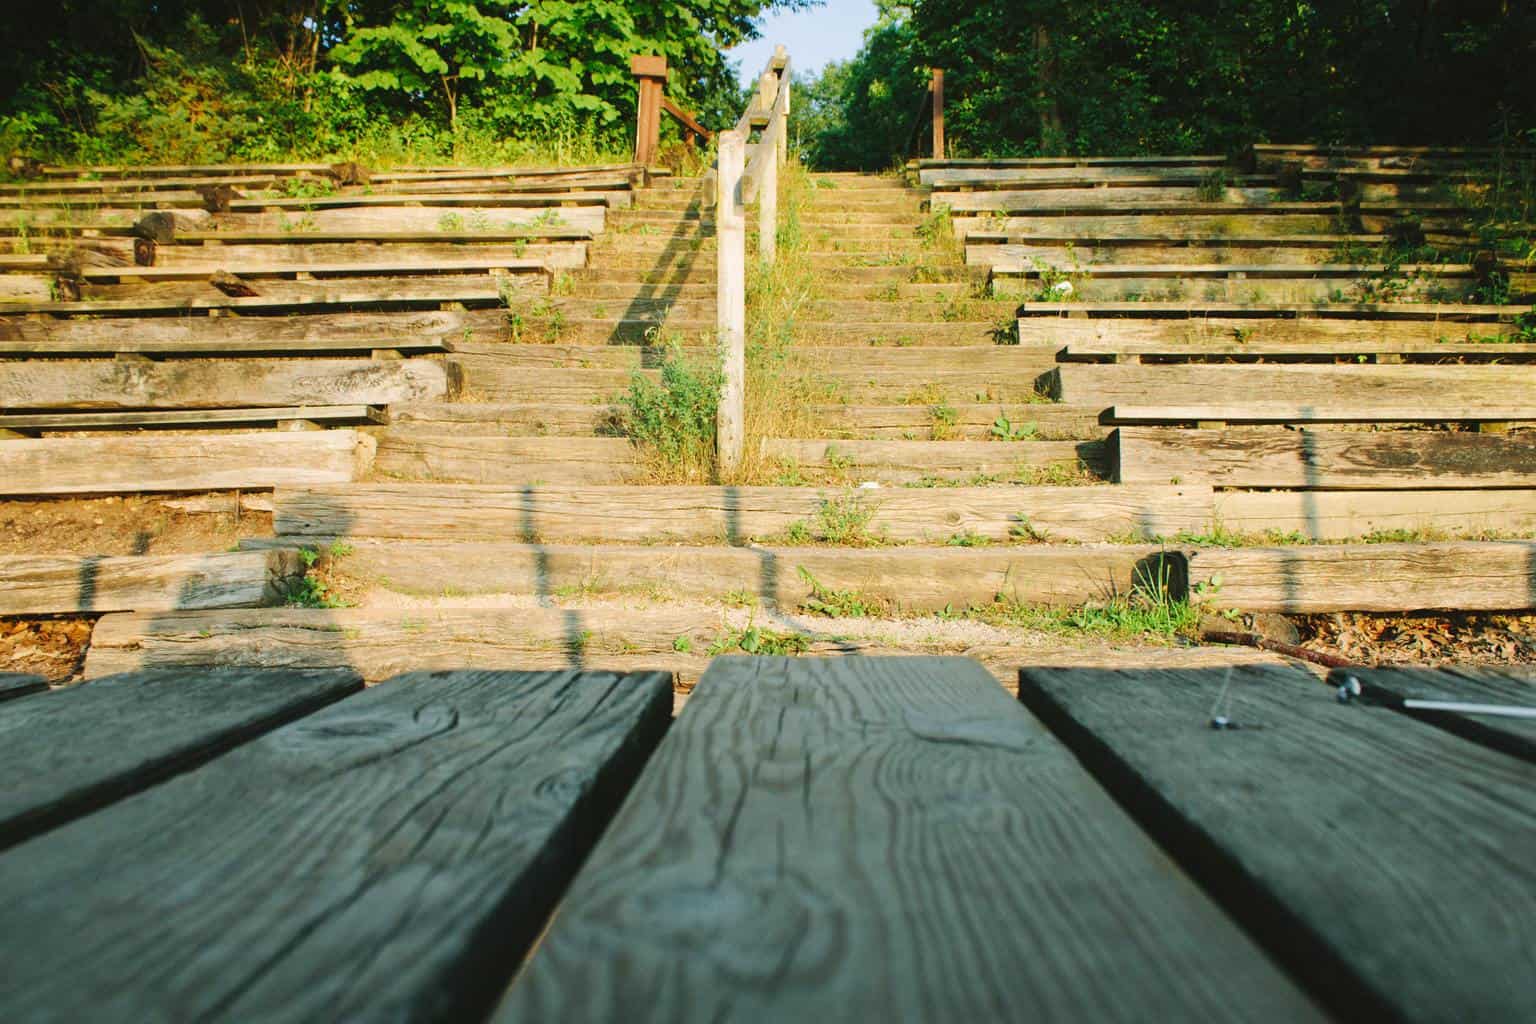 Worm view of wooden steps